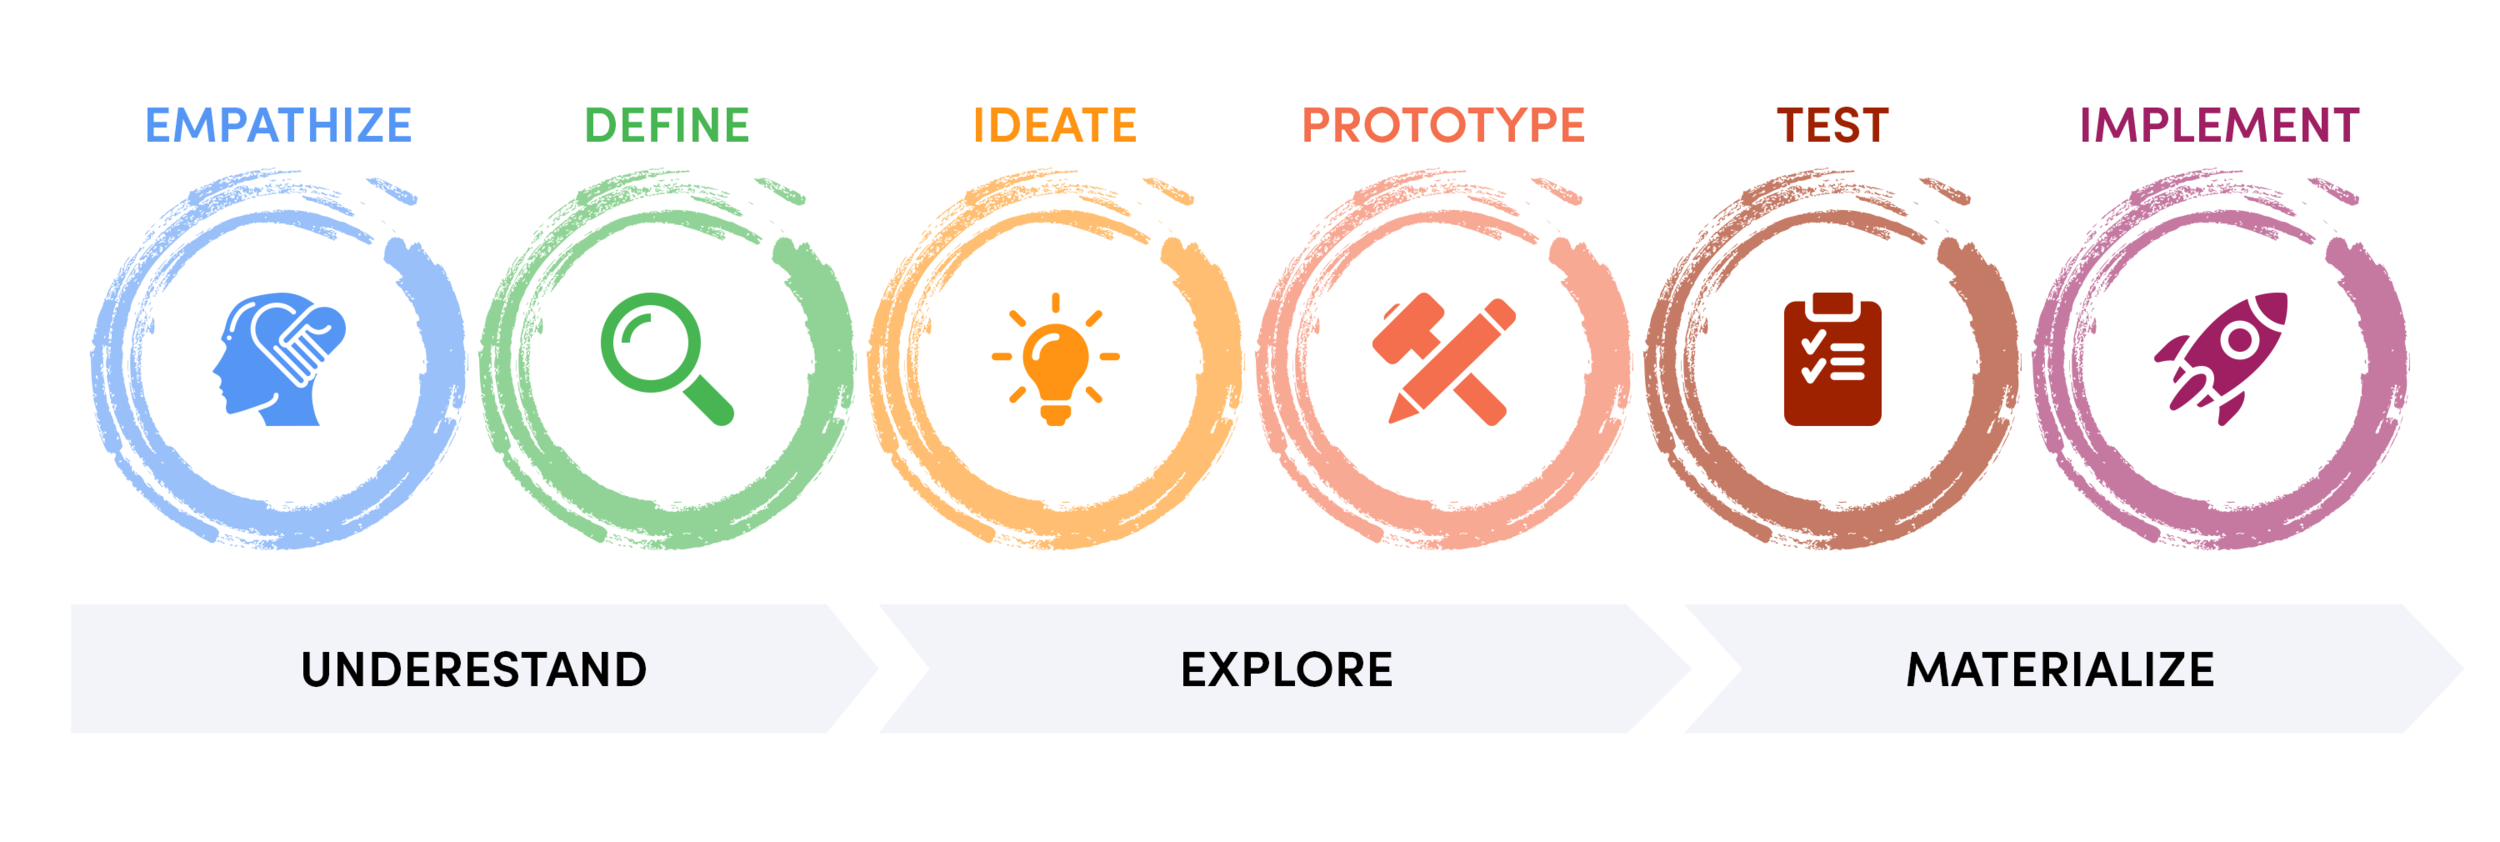   The design thinking process according to the    Stanford d. School   .  